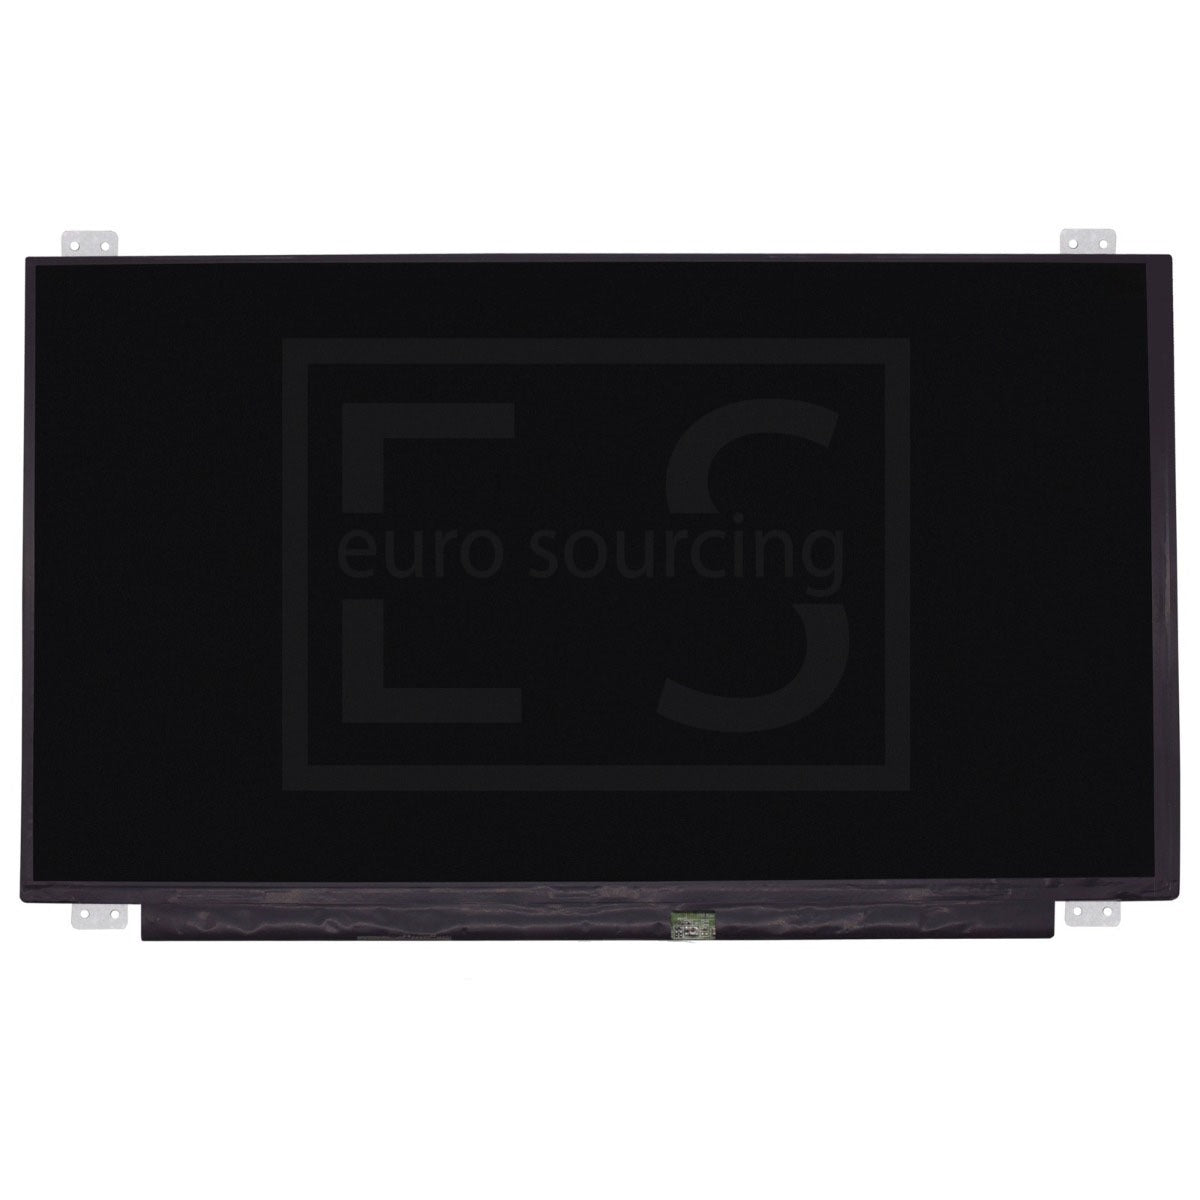 New Replacement LP156WF6 (SP)(K1) Screen 15.6" FHD LED NON IPS MATTE DISPLAY PANEL Compatible With MSI GL62M 7RD 609XTR